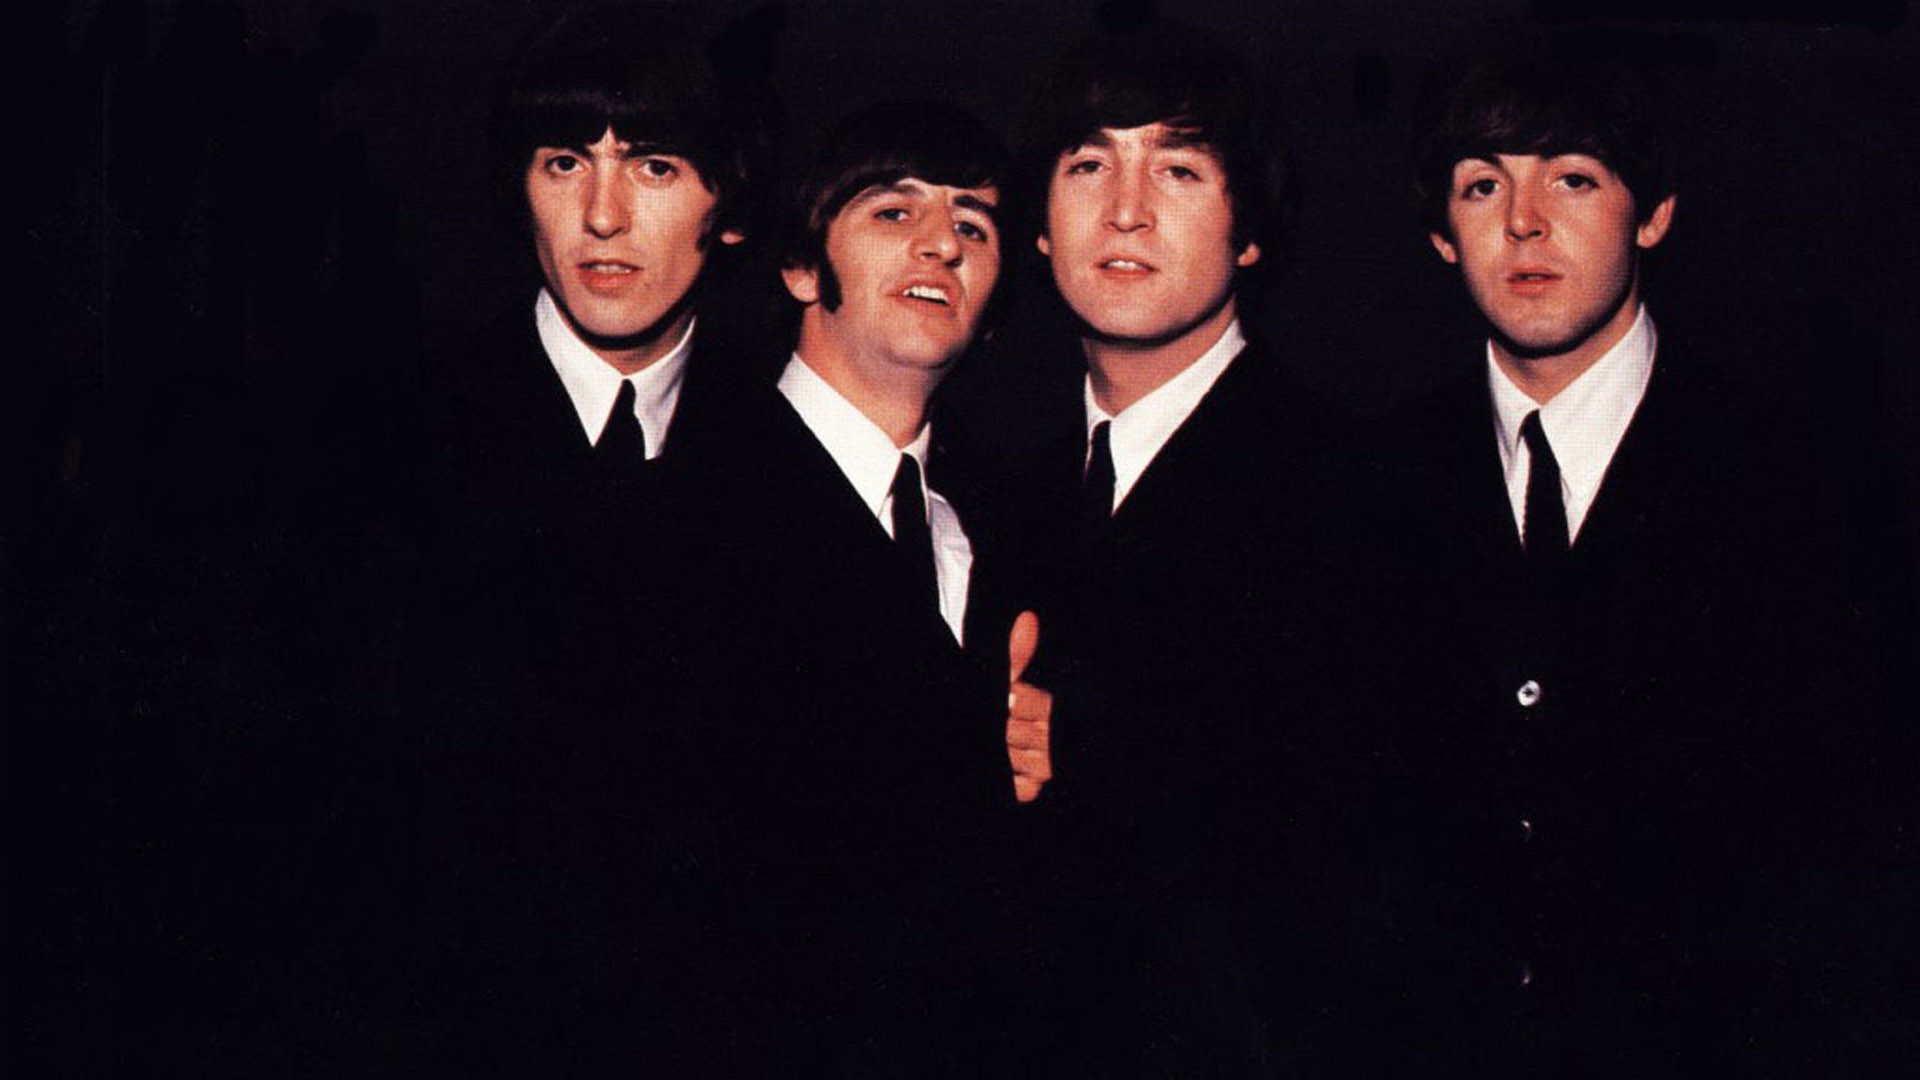 1920x1080 beatles hd images and photos